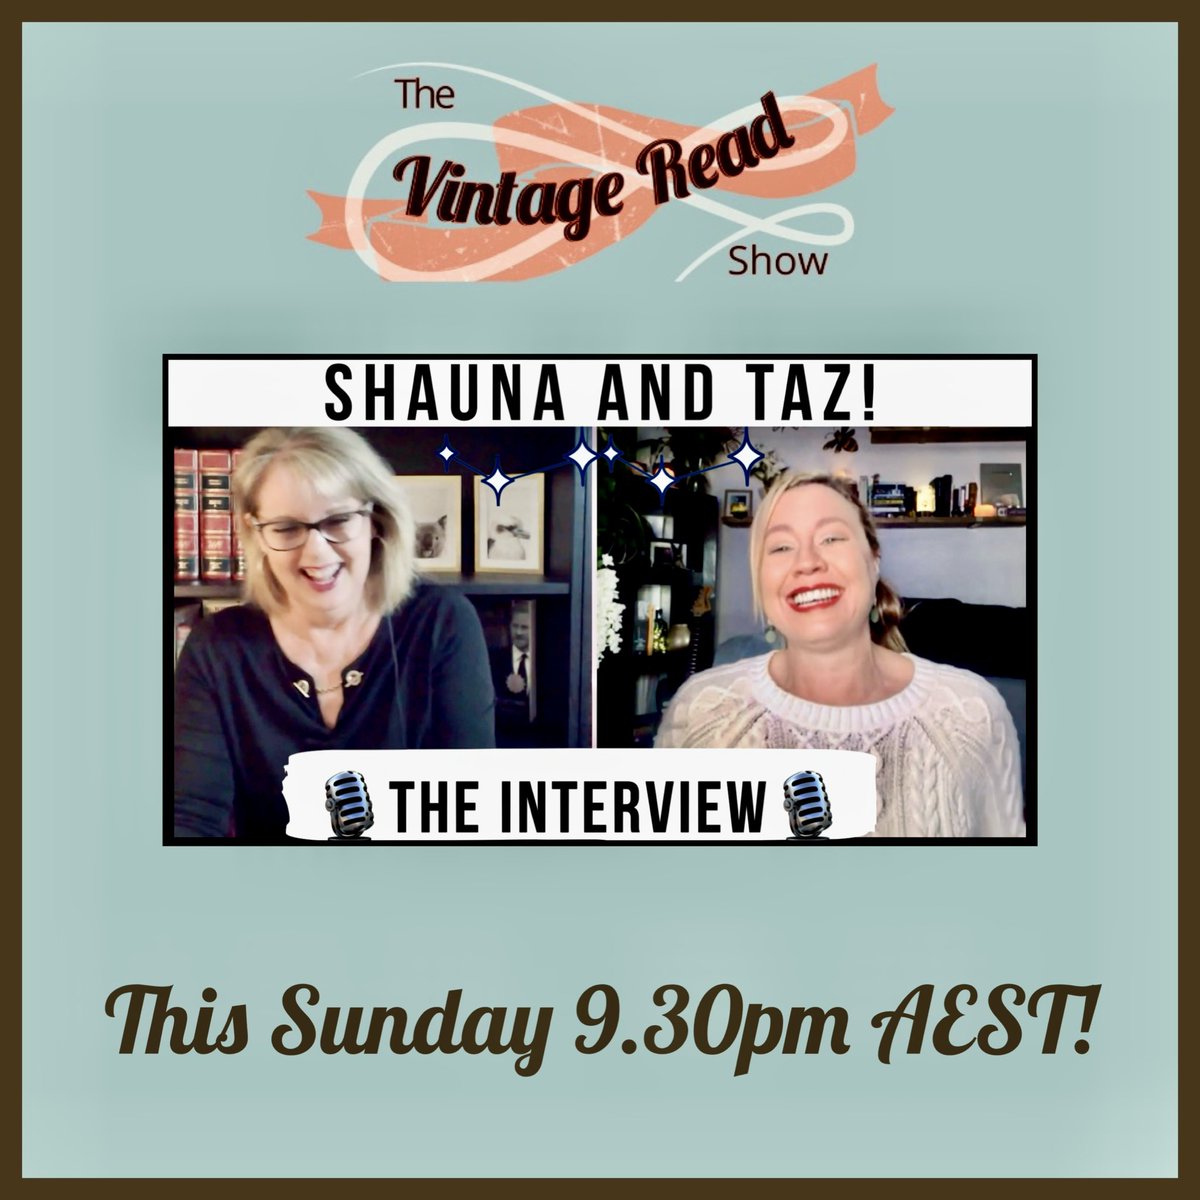 So excited to launch my new interview series with the fabulous TAZ! ⭐️ Coming this Sunday 9.30pm AEST Don’t miss it. 😊🤗💕 #according2taz #vintageread #interview #moretothestory